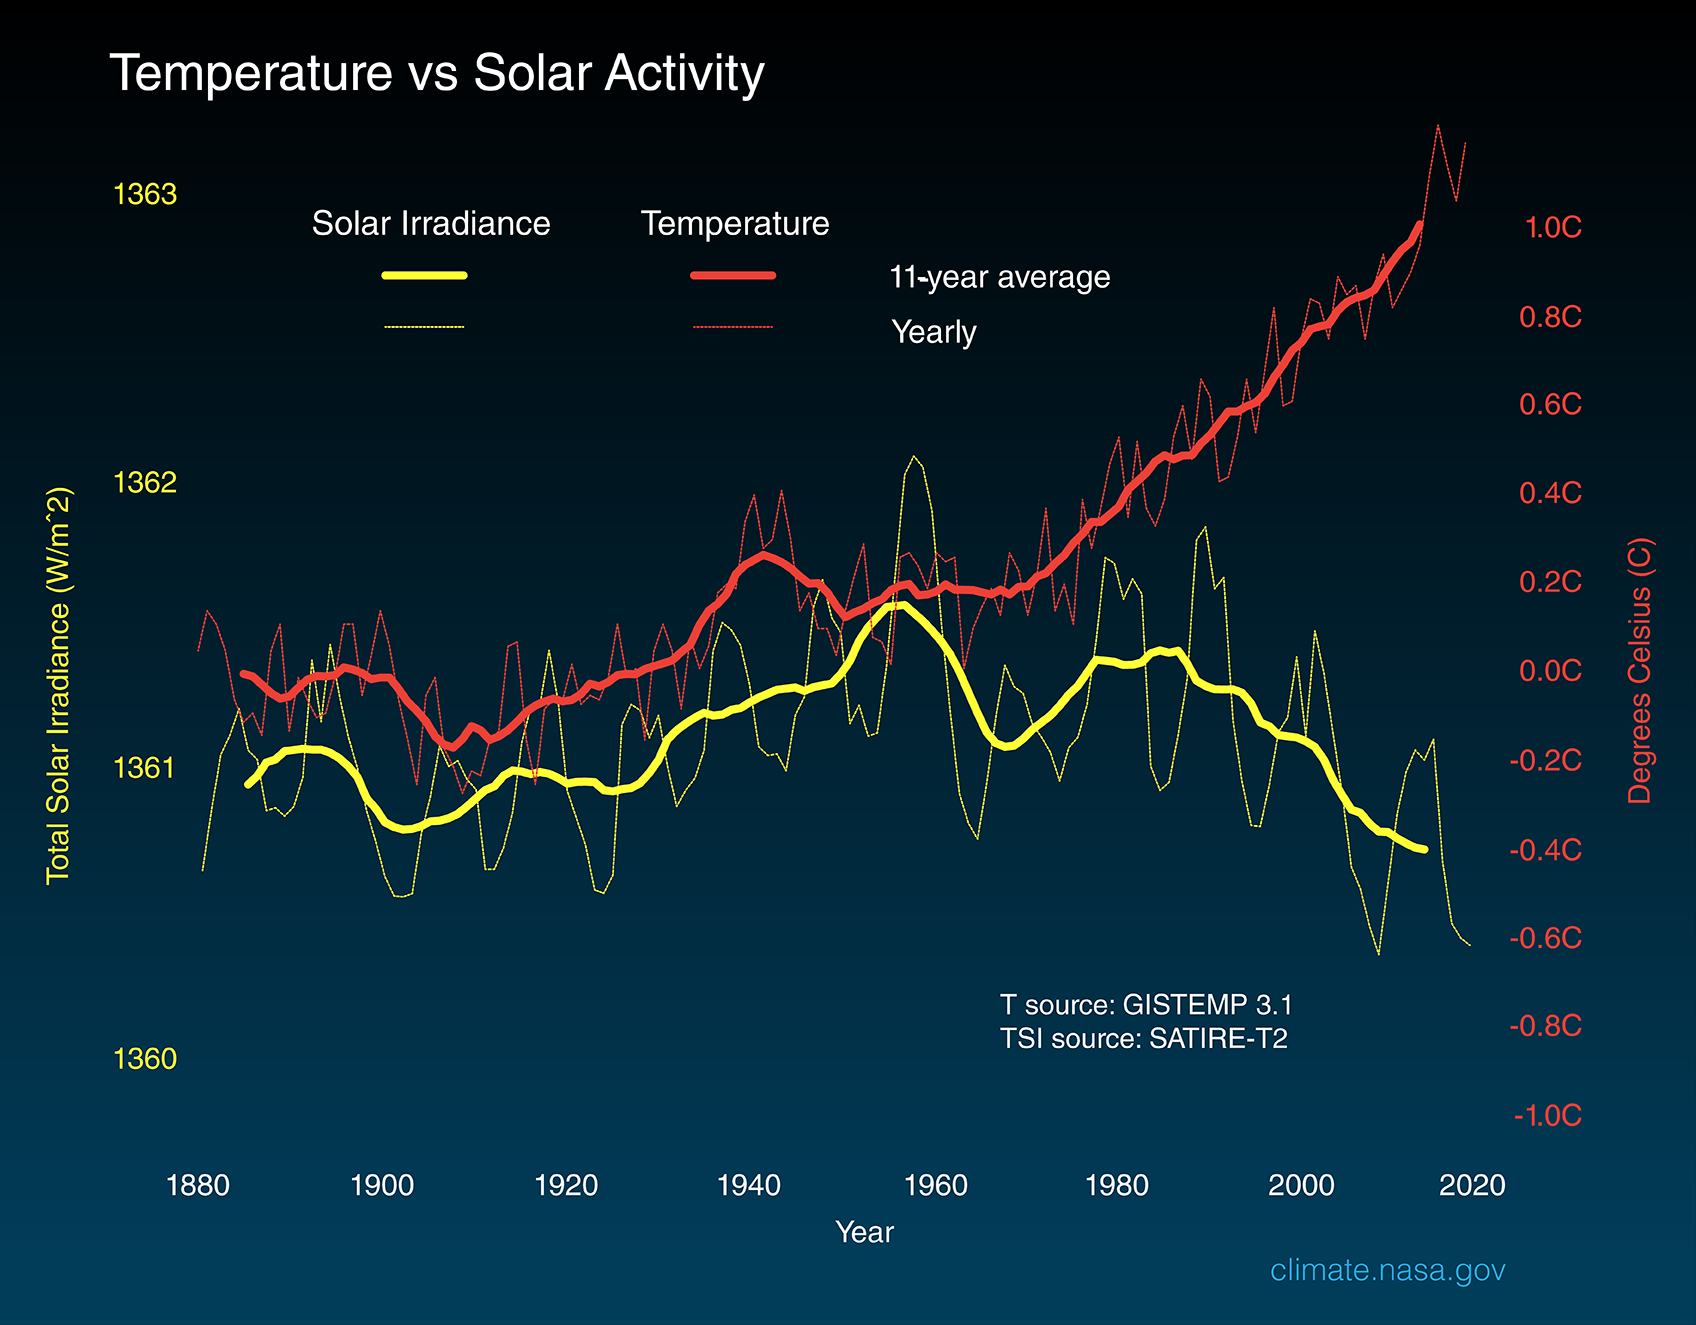 Plot showing that as global surface temperature has increased throughout the years, solar activity has gone down.